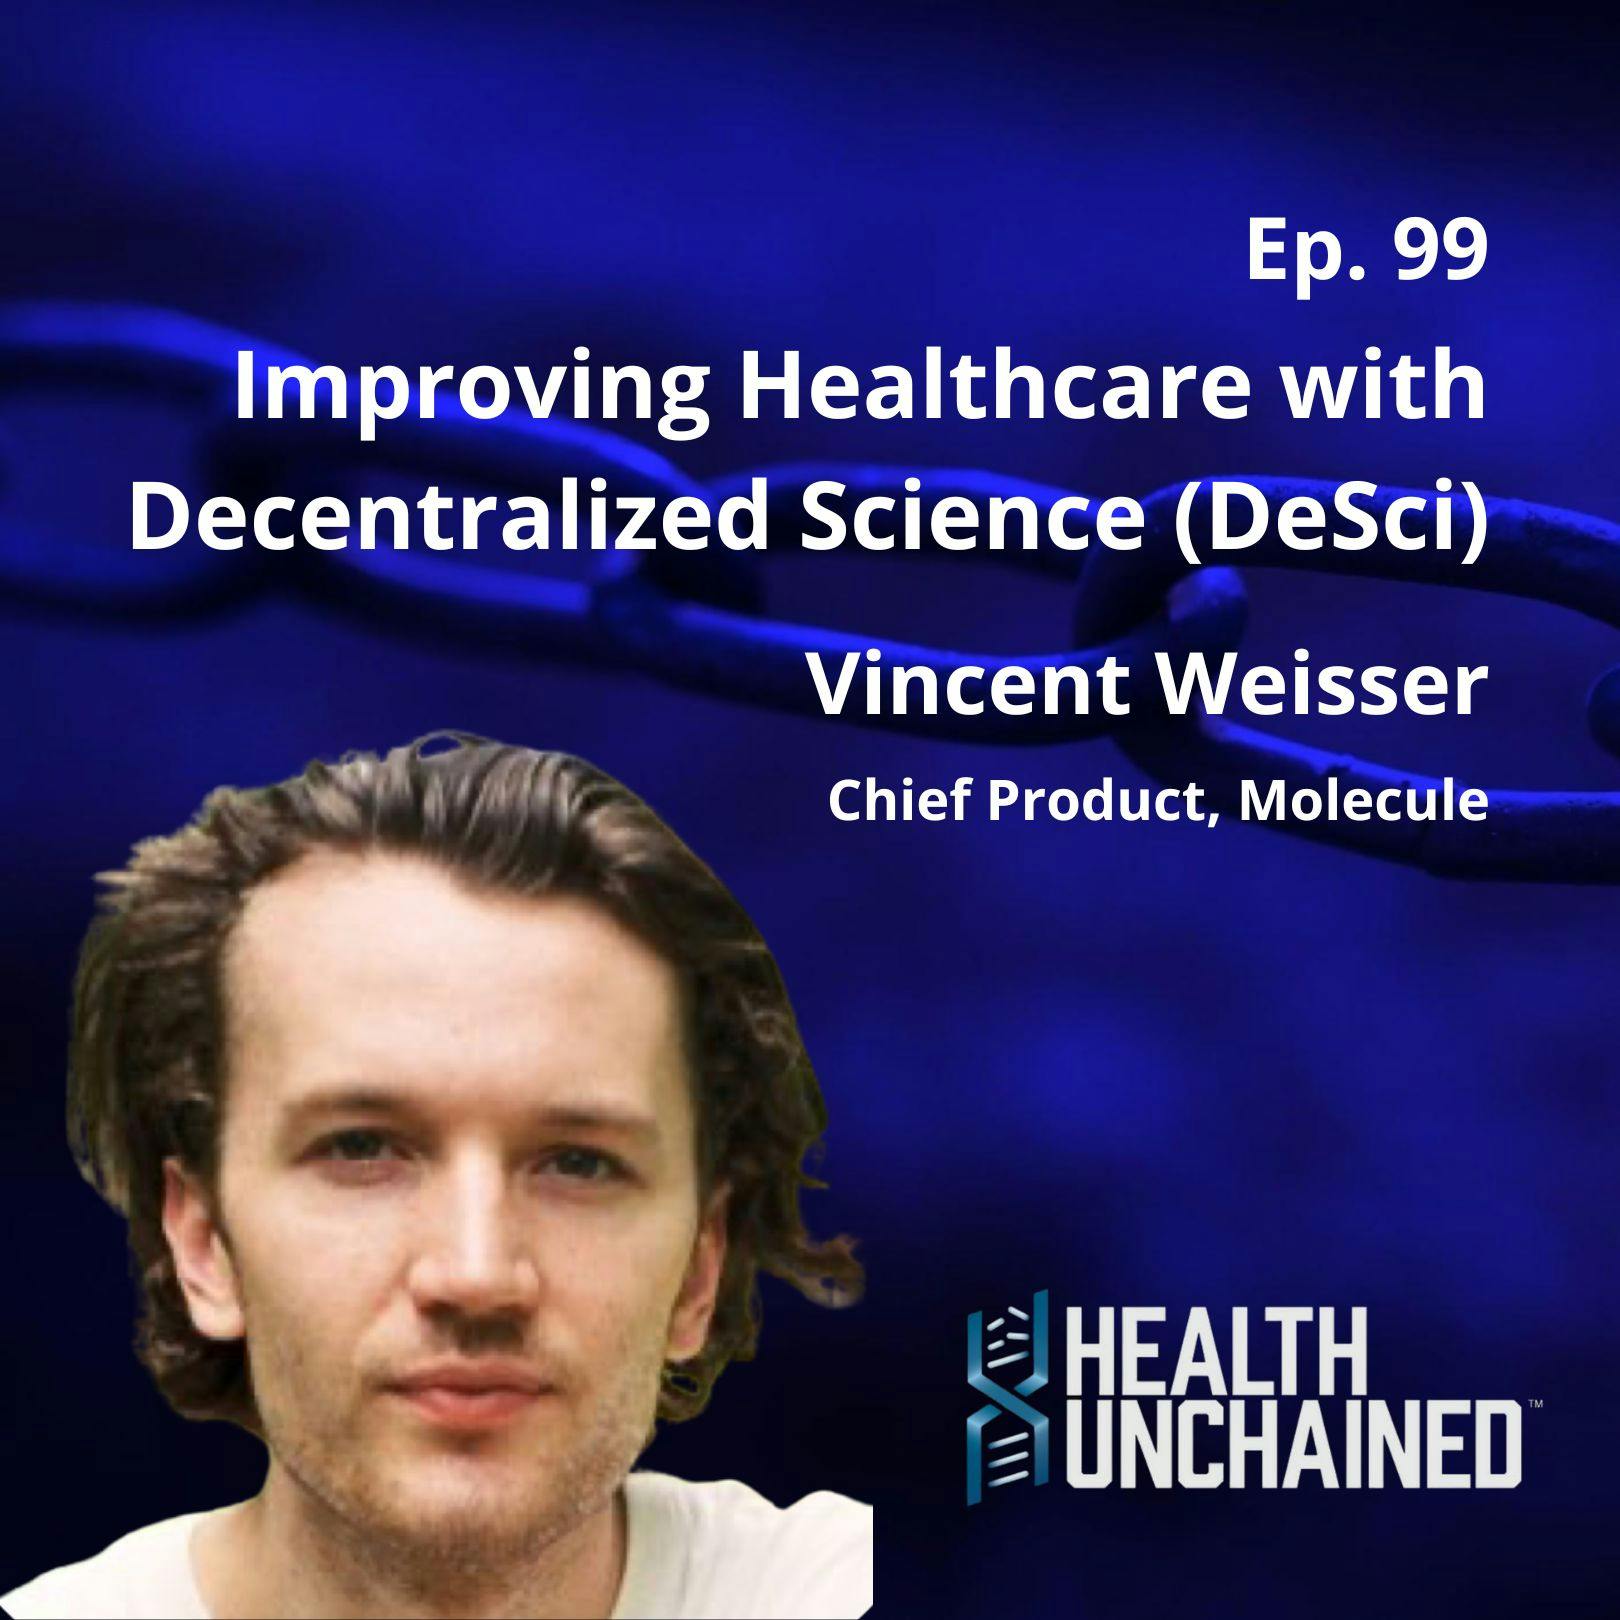 Ep. 99: Improving Healthcare with DeSci - Vincent Weisser (Chief Product at Molecule)